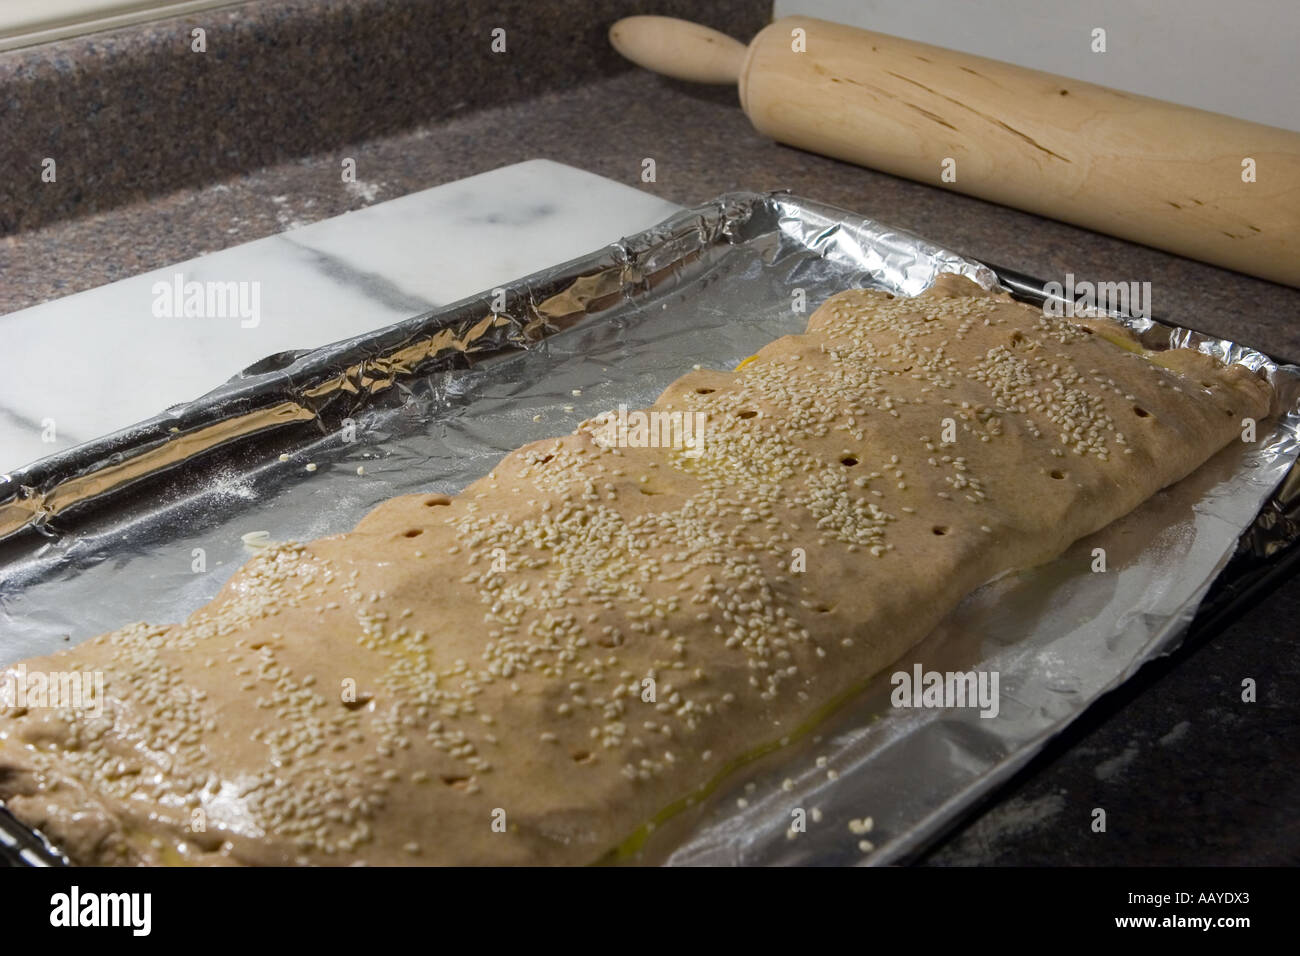 baking sheet with uncooked calzone on kitchen countertop Stock Photo